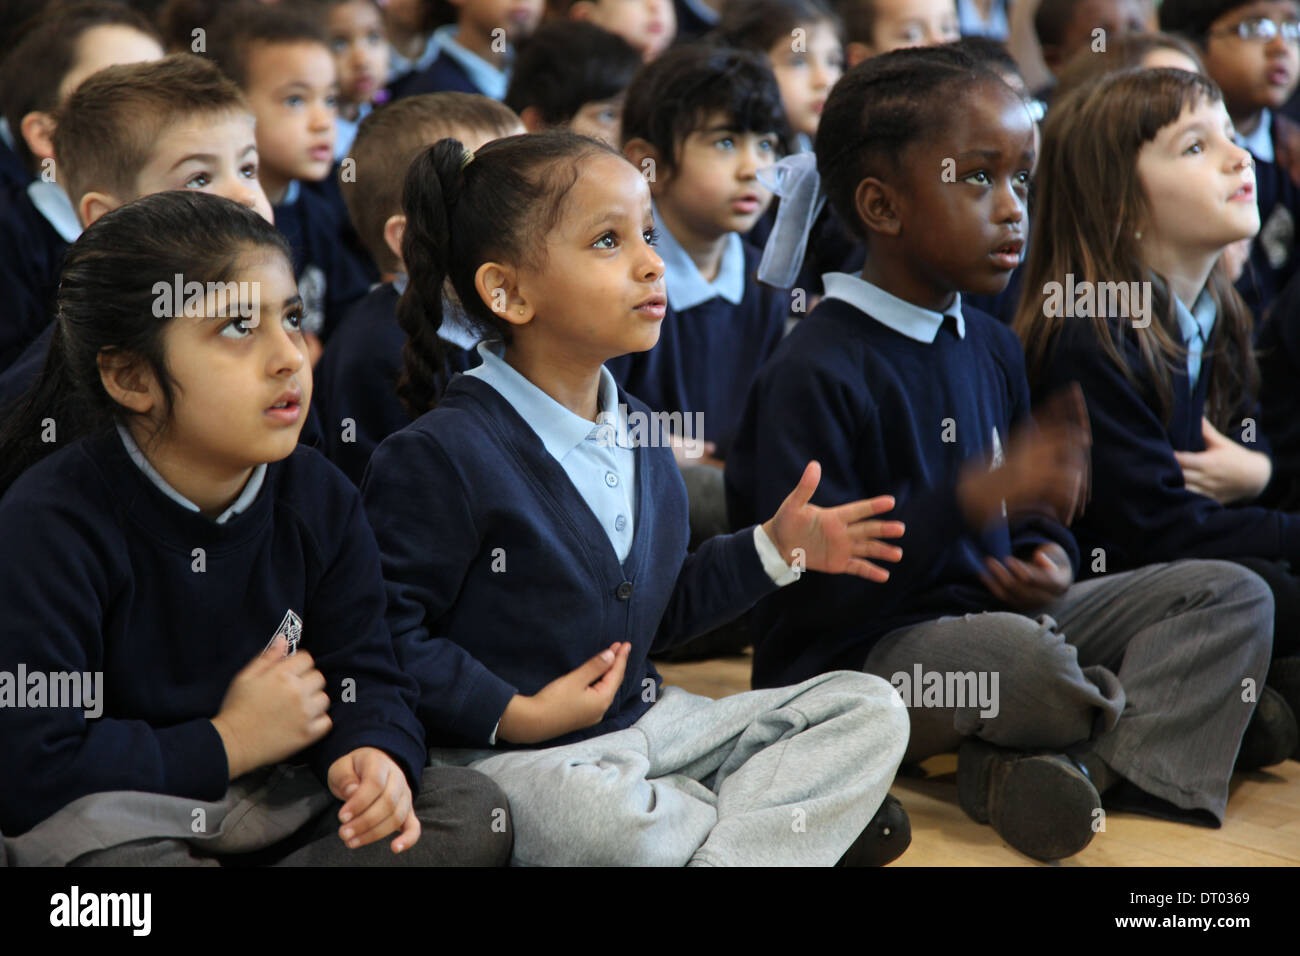 Children at a school assembly singing, clapping and performing actions Stock Photo